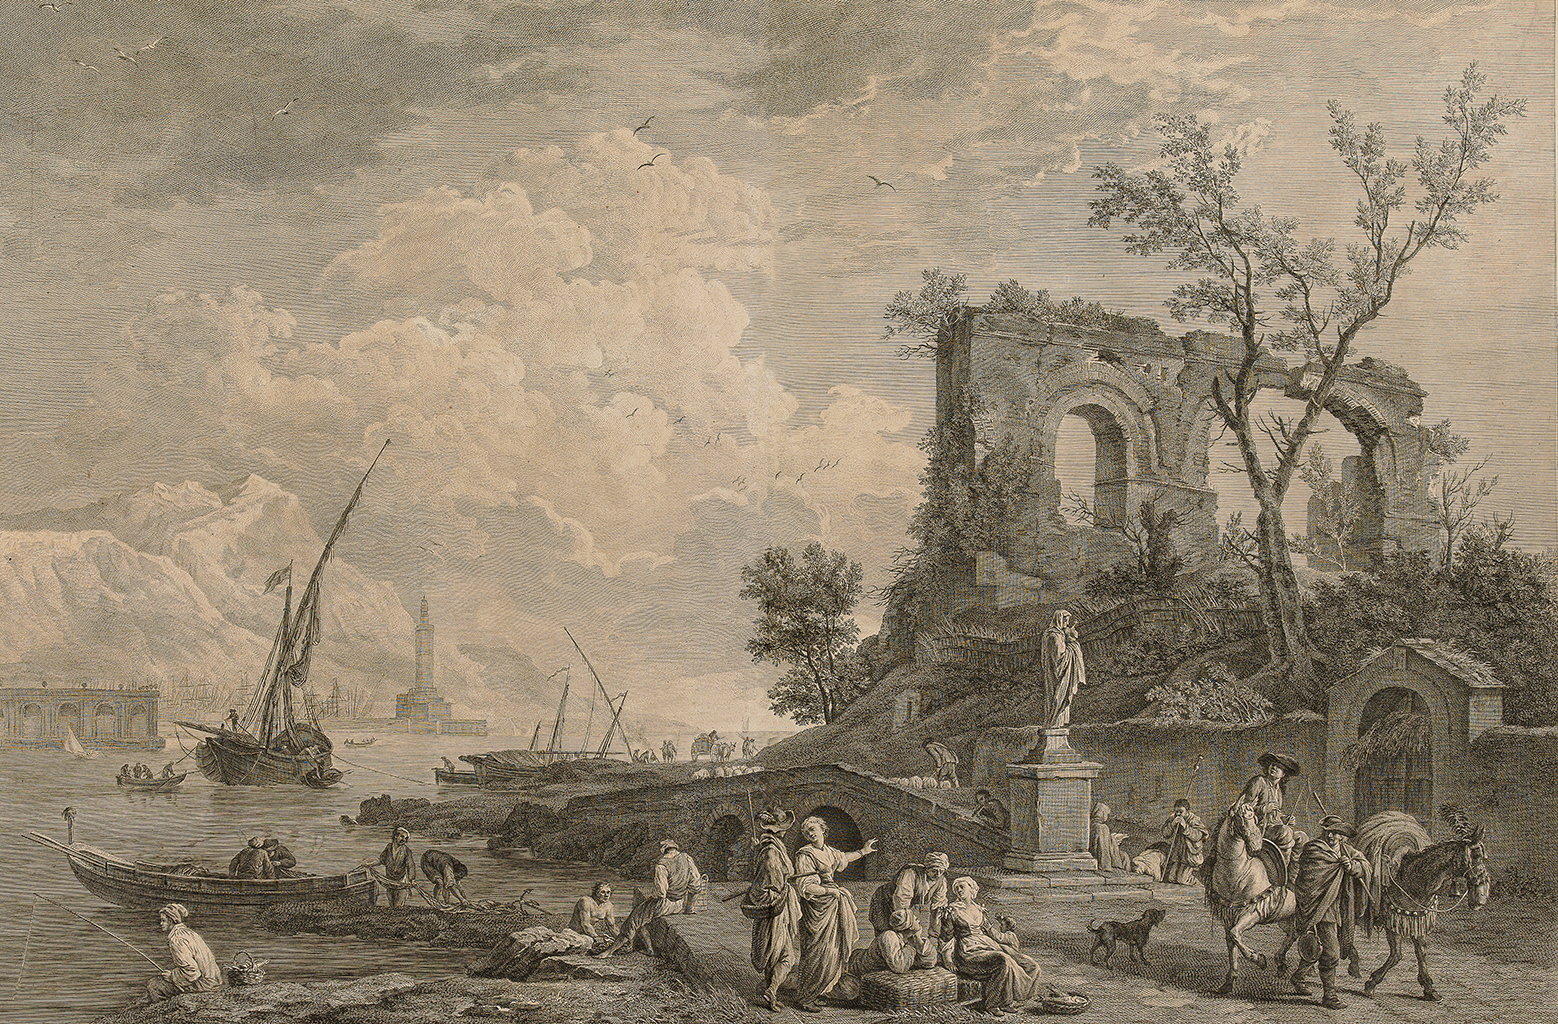 A black and white print after a painting that depicts a bustling shoreline populated by people talking, riding or leading their horses, and fishing in the seaport. In the middle distance is a statue of the Virgin Mary and a small stone bridge. Behind that is a treed hill and the ruins of an arched bridge or acquaduct. At the left, beyond the seaport crowded with small wooden boats, is a tall lighthouse near a vast mountain. The sky is full of clouds.